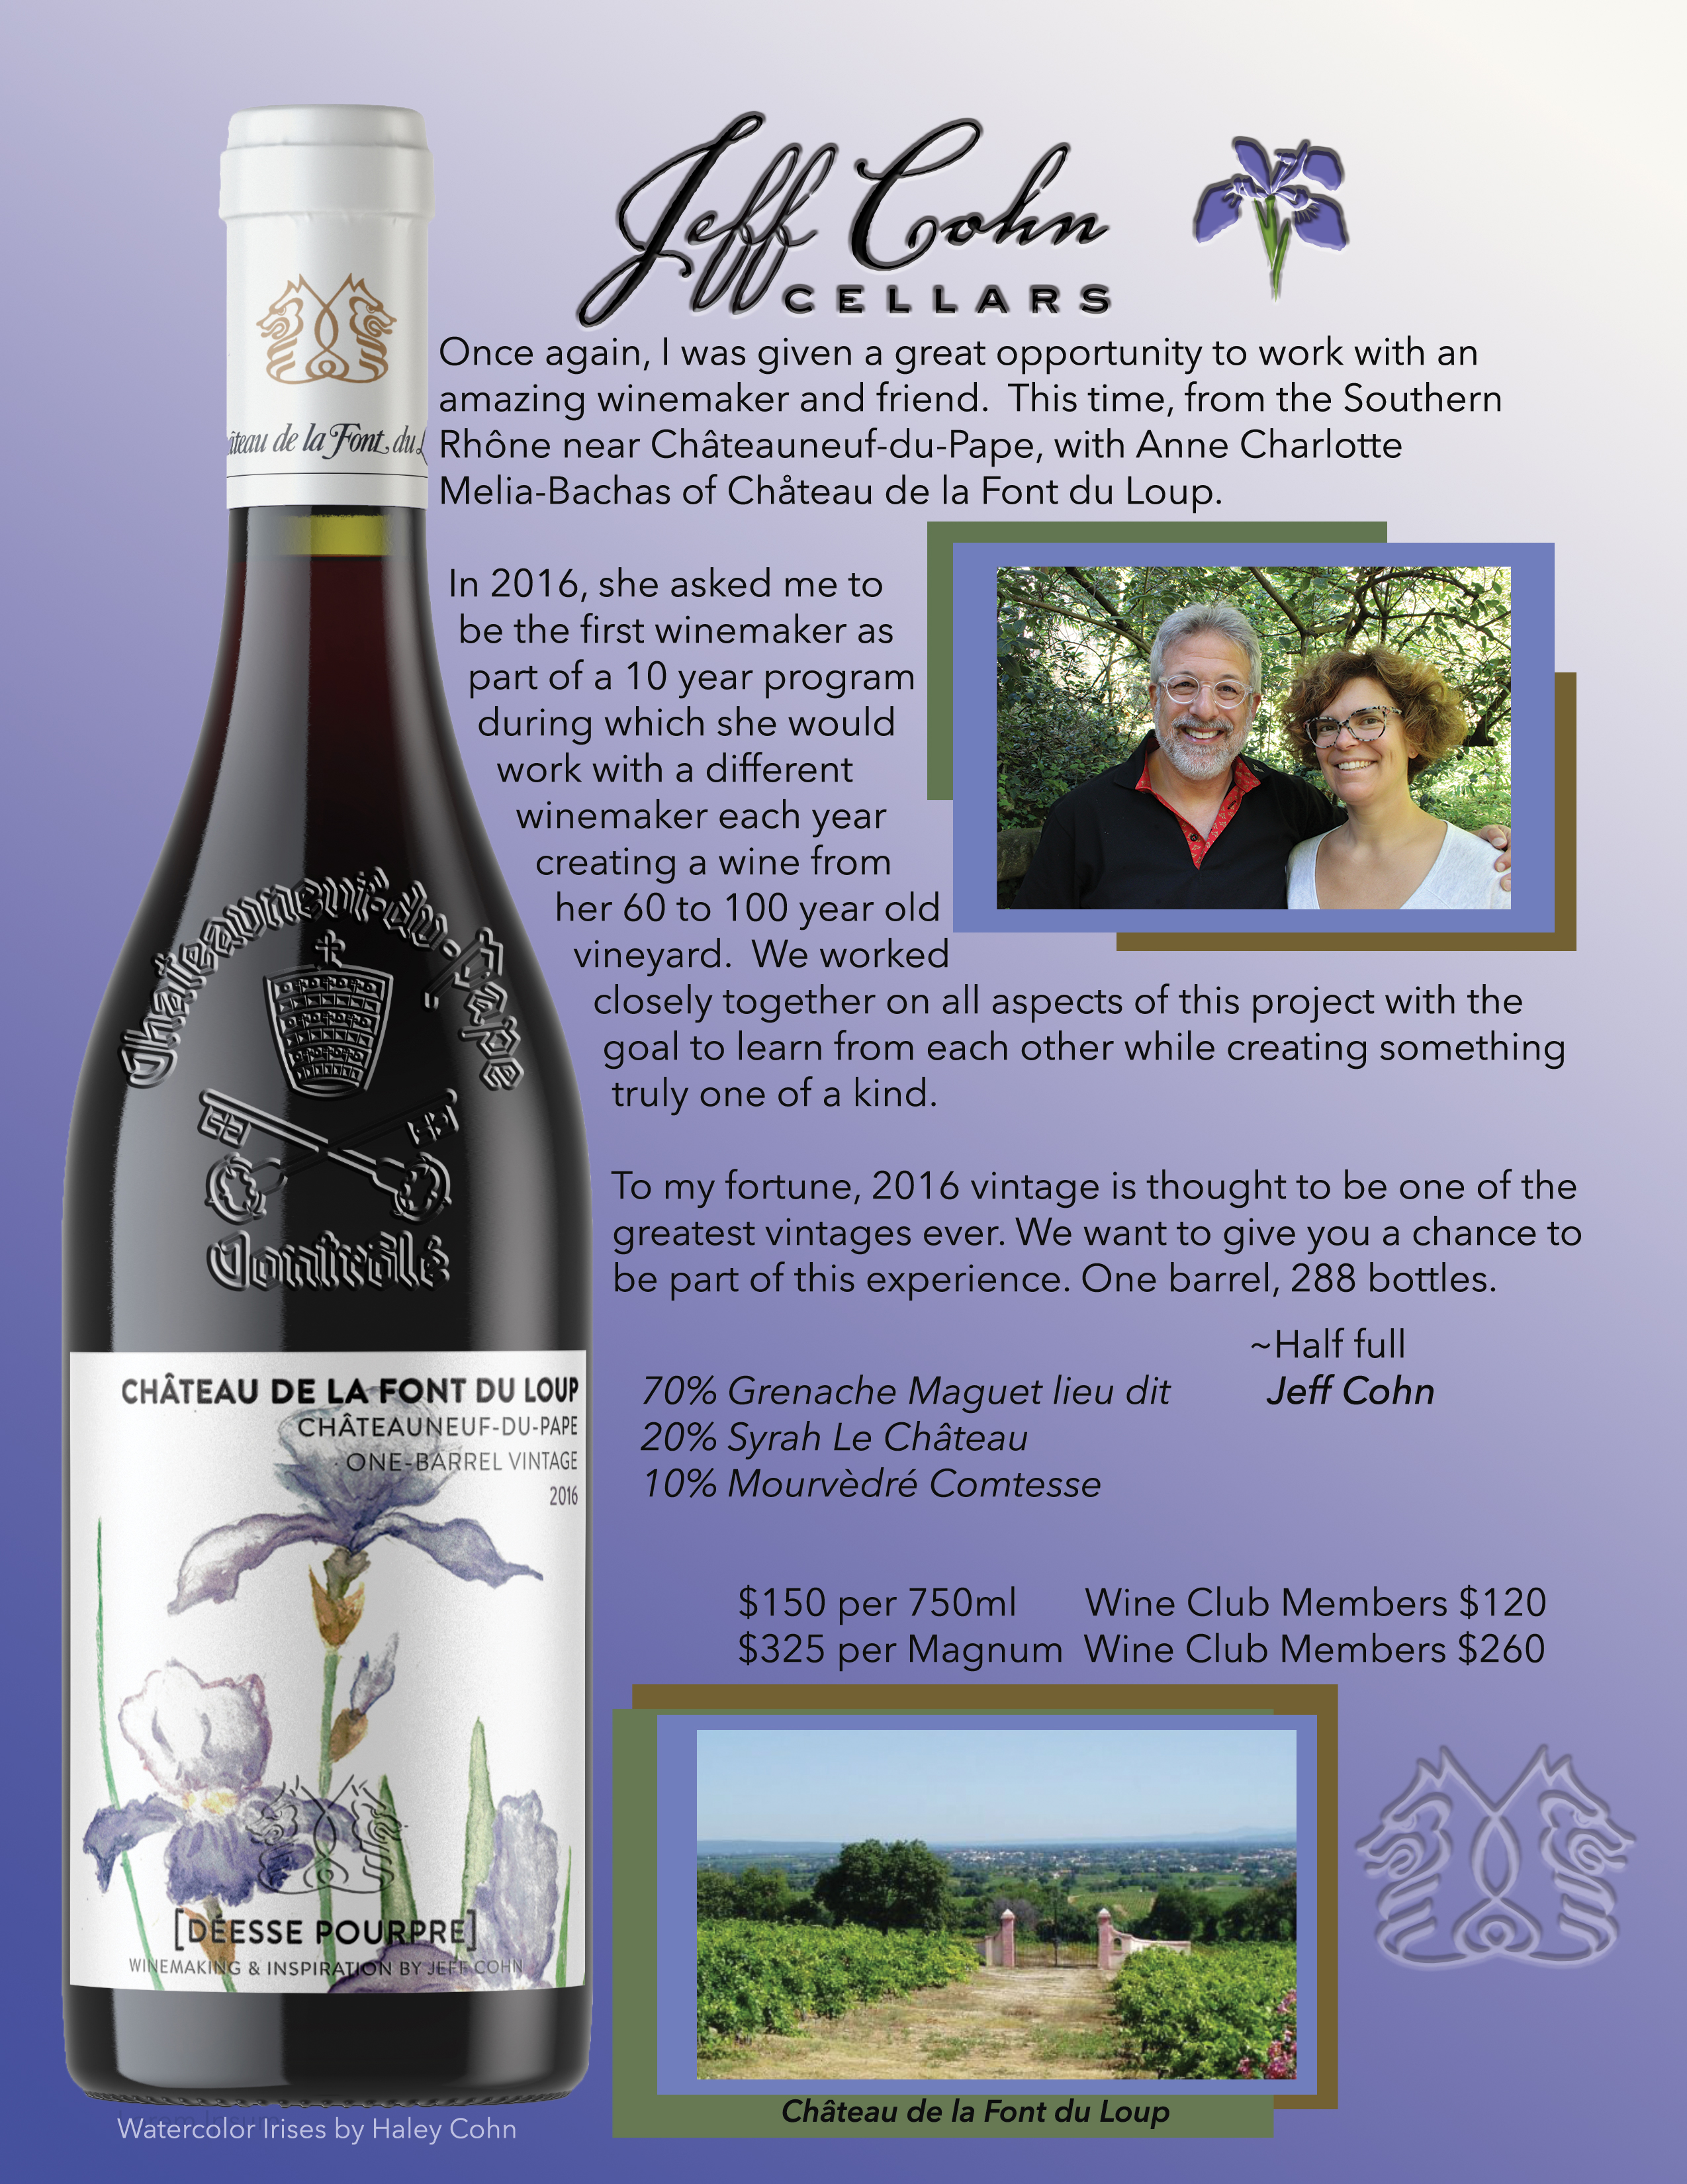 jeff cohn cellars newsletter about the Deesee Pourpre wine release